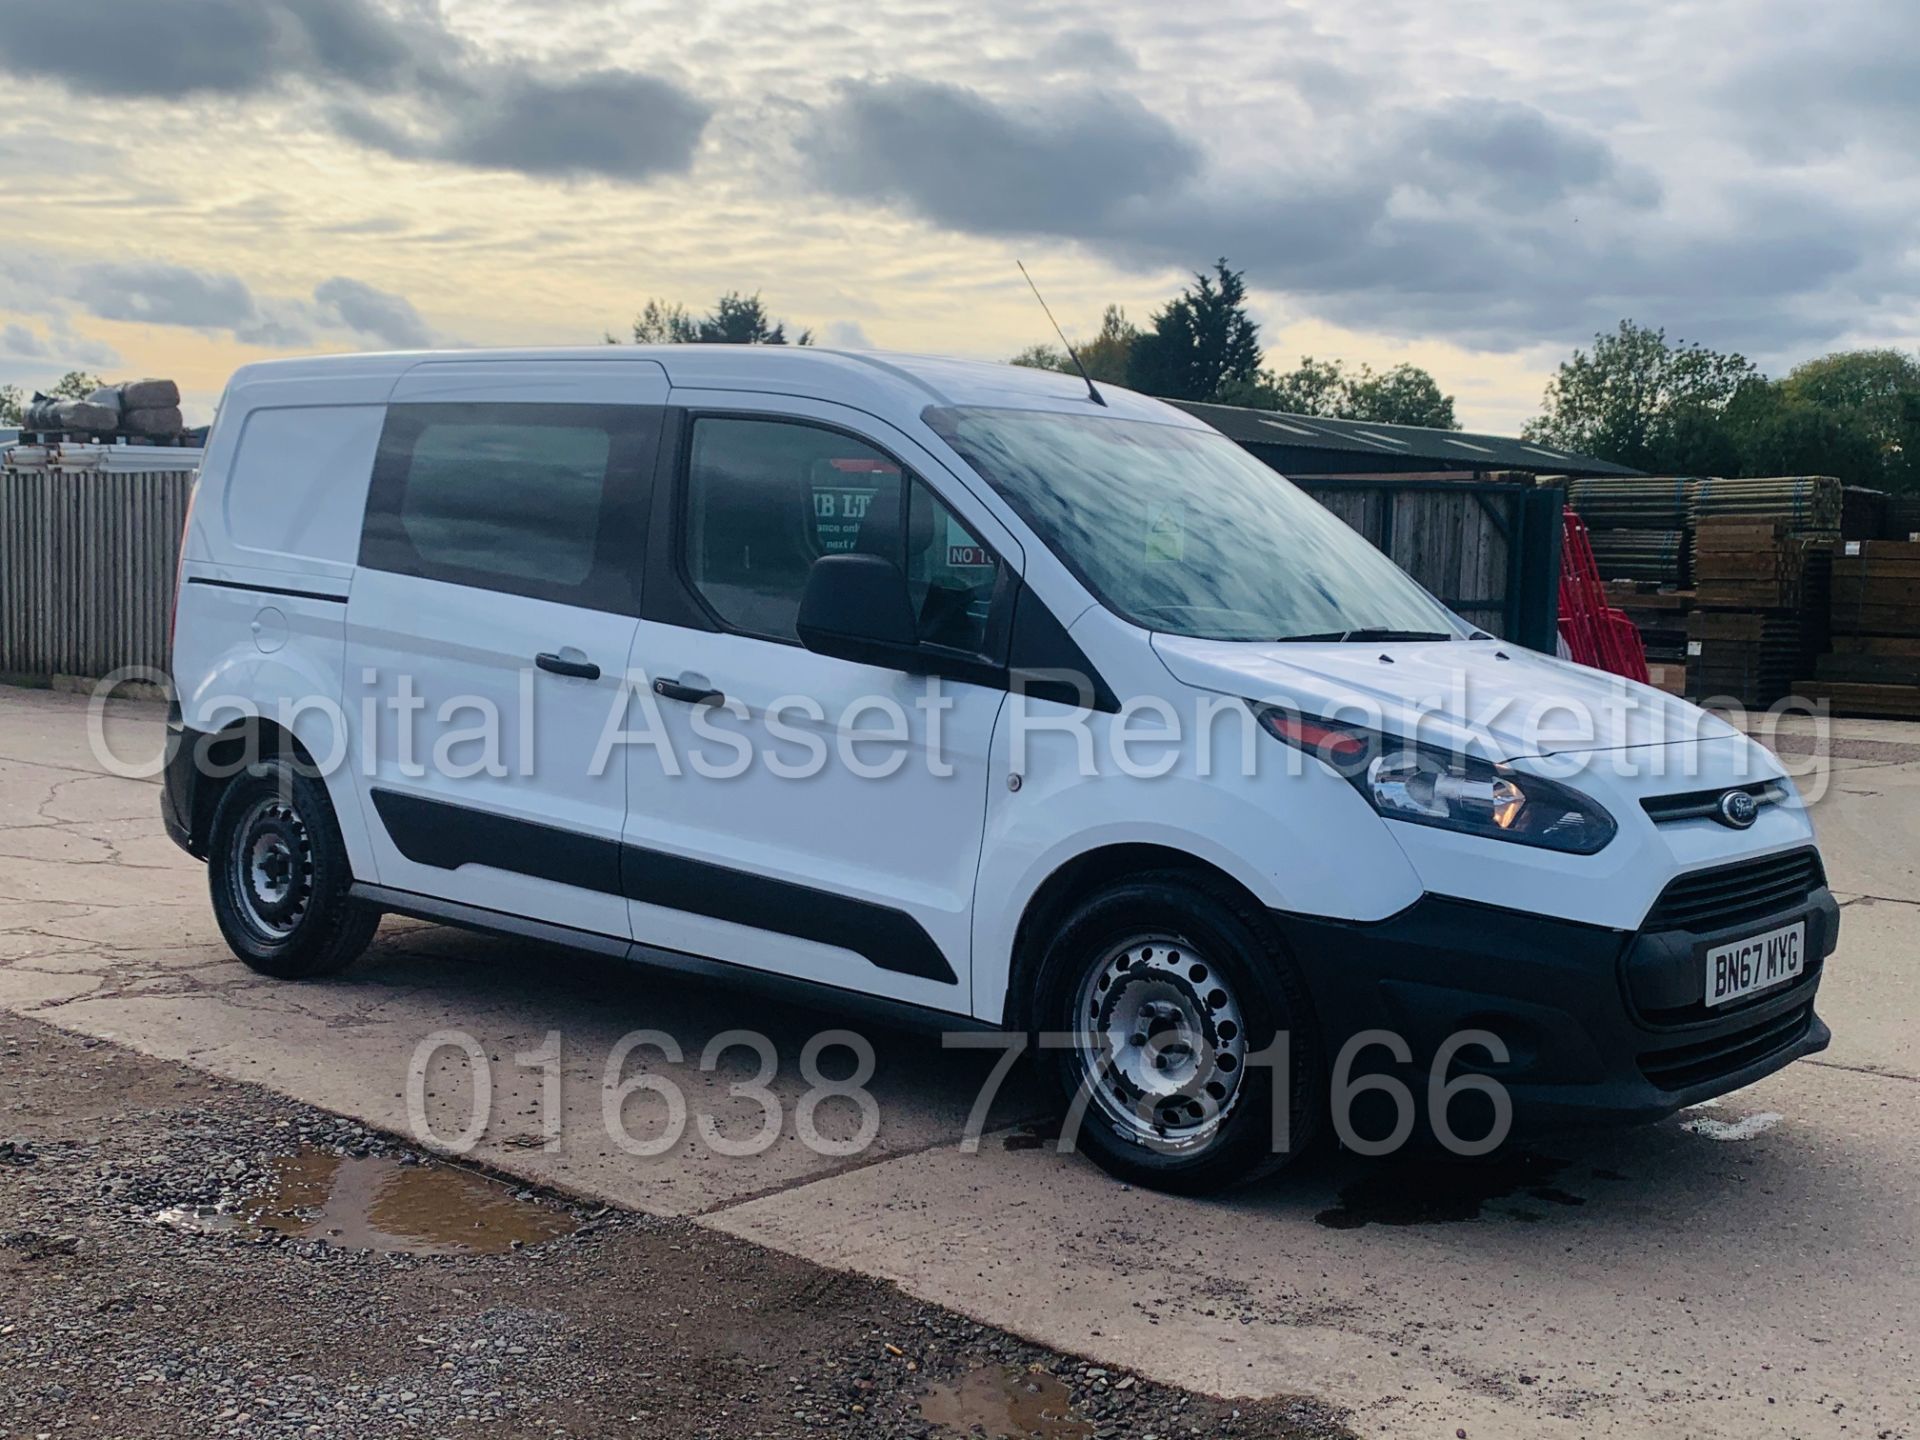 (ON SALE) FORD TRANSIT CONNECT *LWB - 5 SEATER CREW VAN* (2018 - EURO 6) 1.5 TDCI *A/C* (1 OWNER) - Image 12 of 40